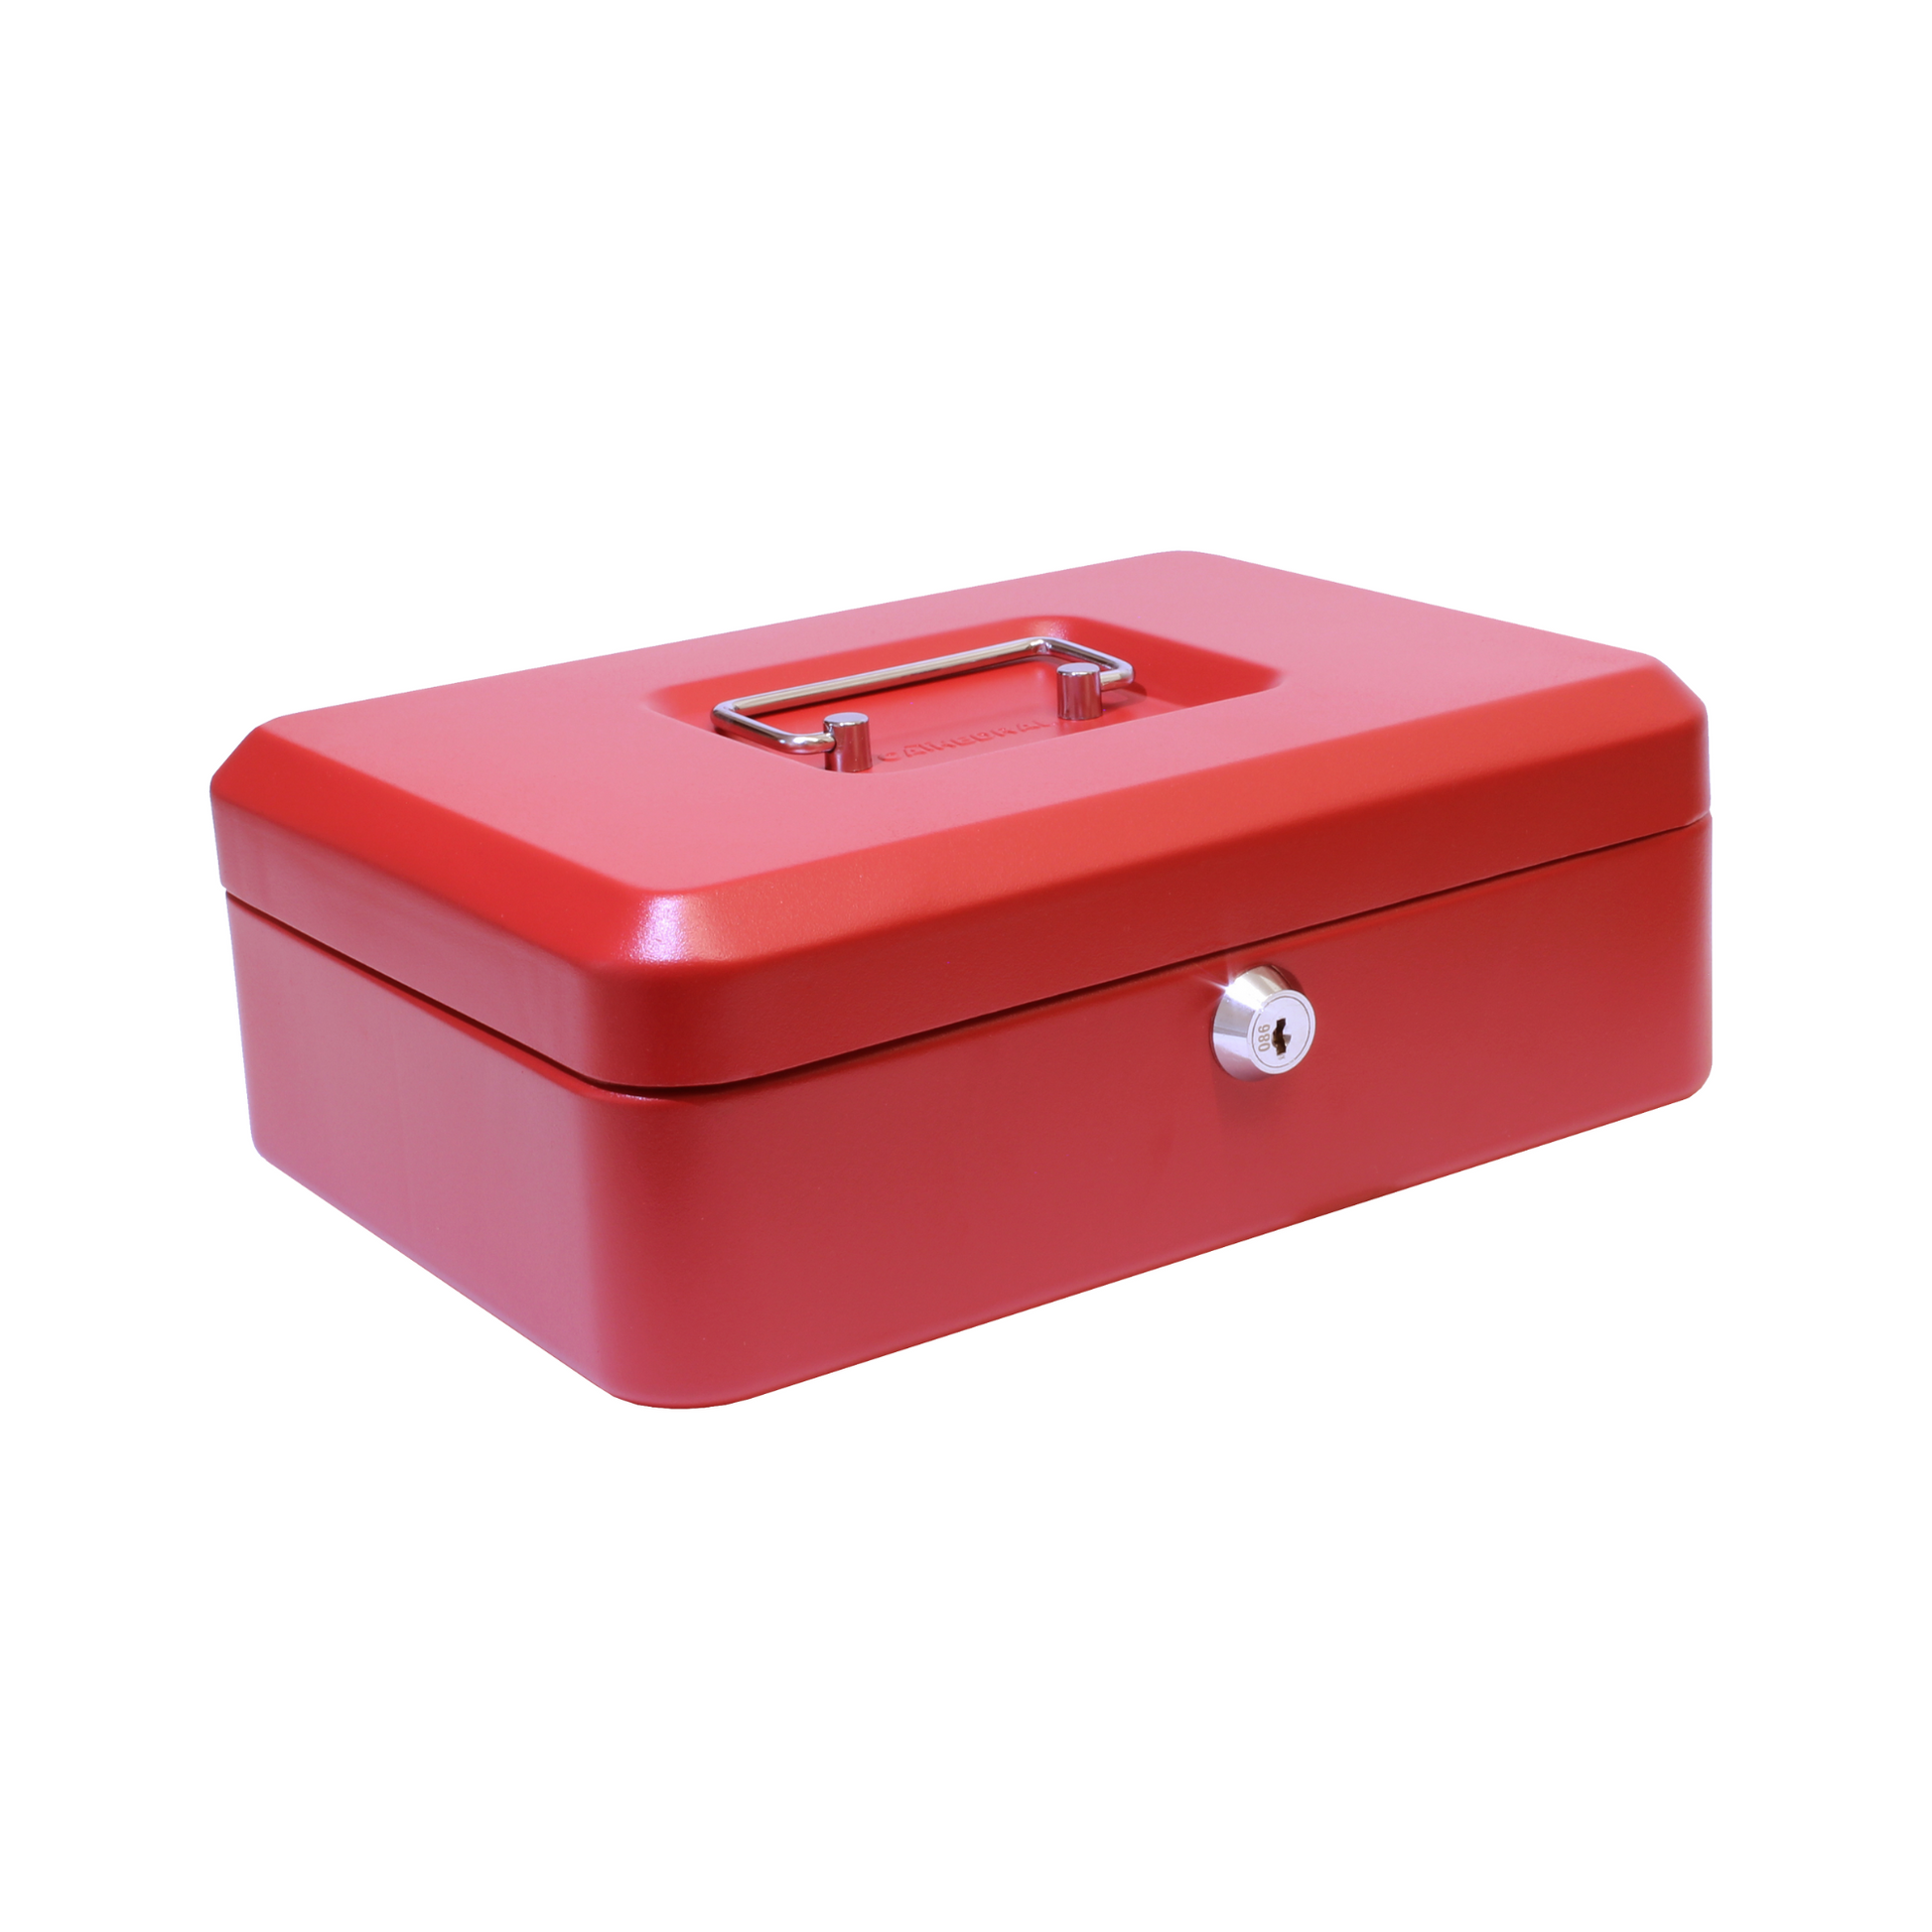 A closed matte red 10-inch key lockable cash box. The box features a sturdy metal handle and a secure lock at the front for safekeeping of cash and coins.